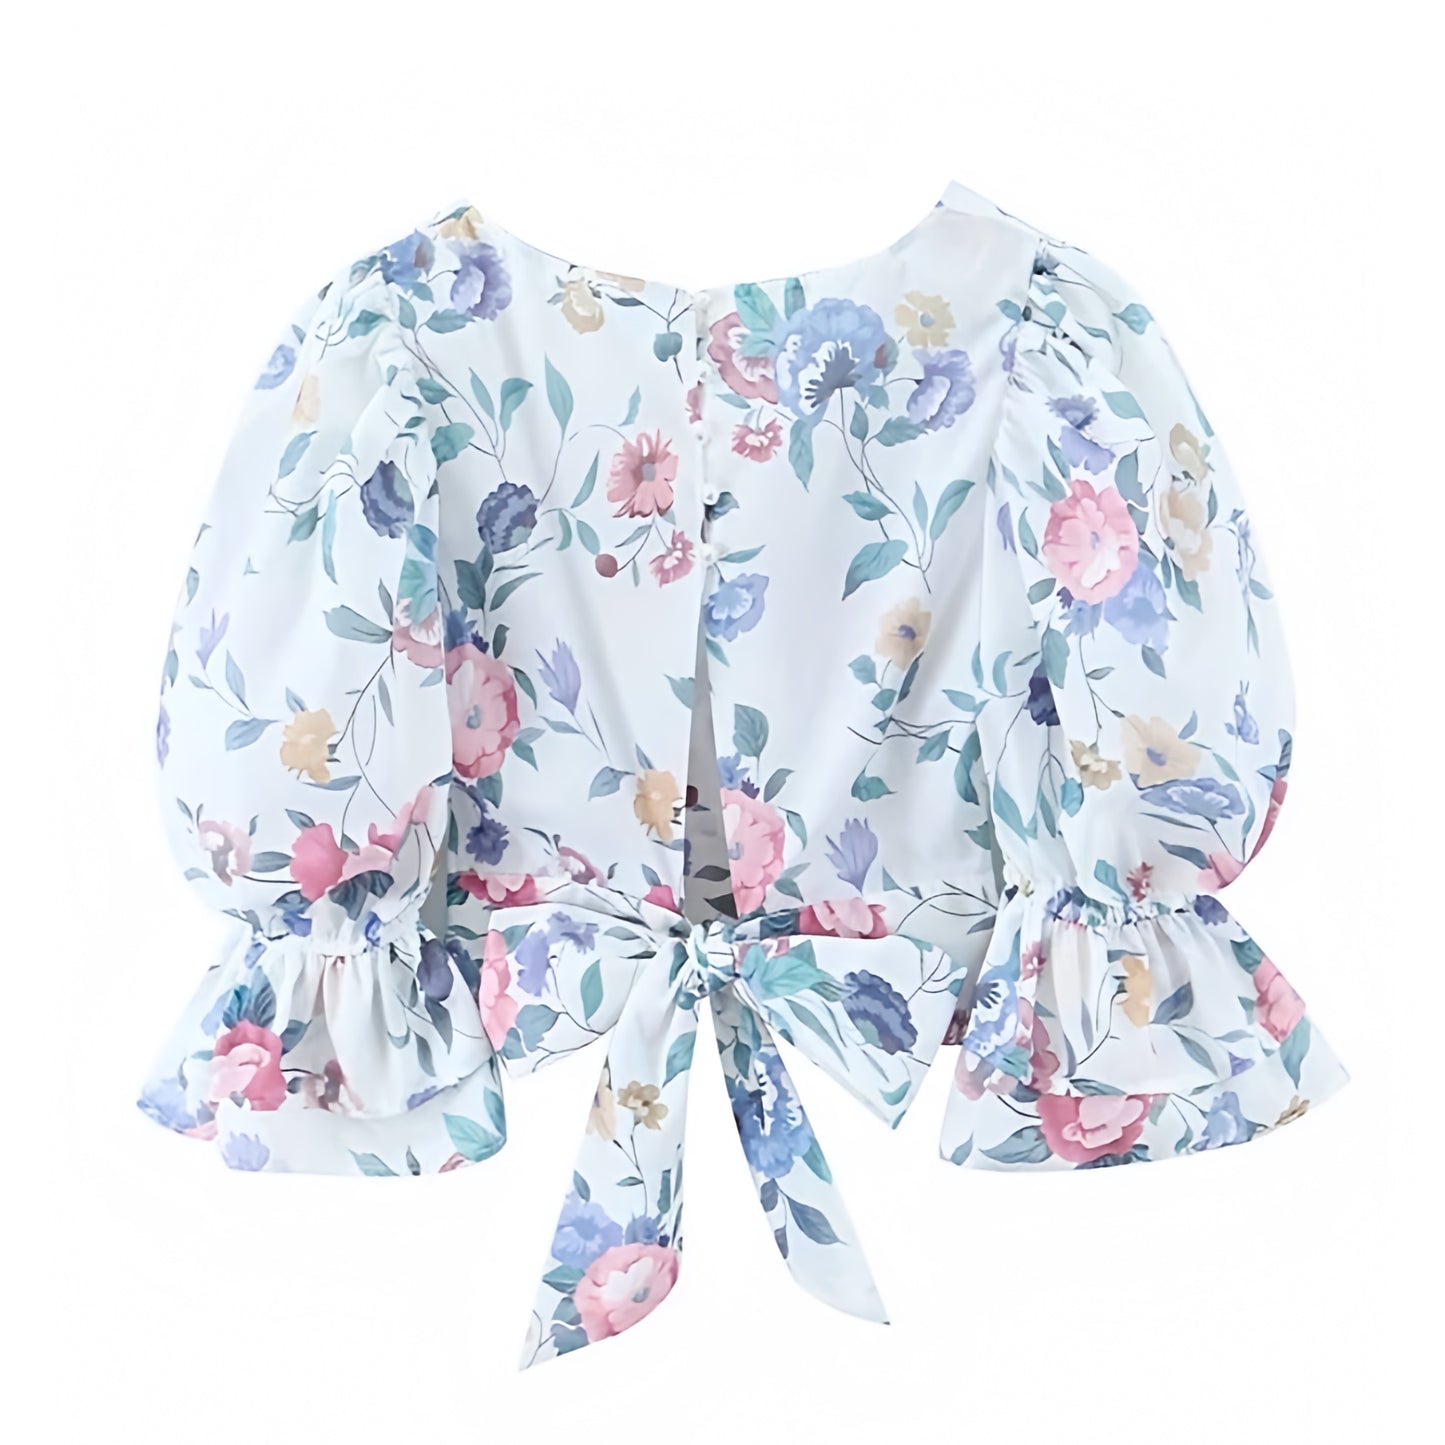 floral-print-light-blue-pink-multi-color-flower-patterned-slim-fit-corset-ruffle-trim-round-neckline-short-puff-sleeve-backless-open-back-bow-string-tie-crop-blouse-top-shirt-women-ladies-teens-tweens-chic-trendy-spring-2024-summer-elgeant-casual-feminine-preppy-style-coquette-beach-wear-vacation-tops-altard-state-zara-loveshackfancy-aritzia-revolve-dupe